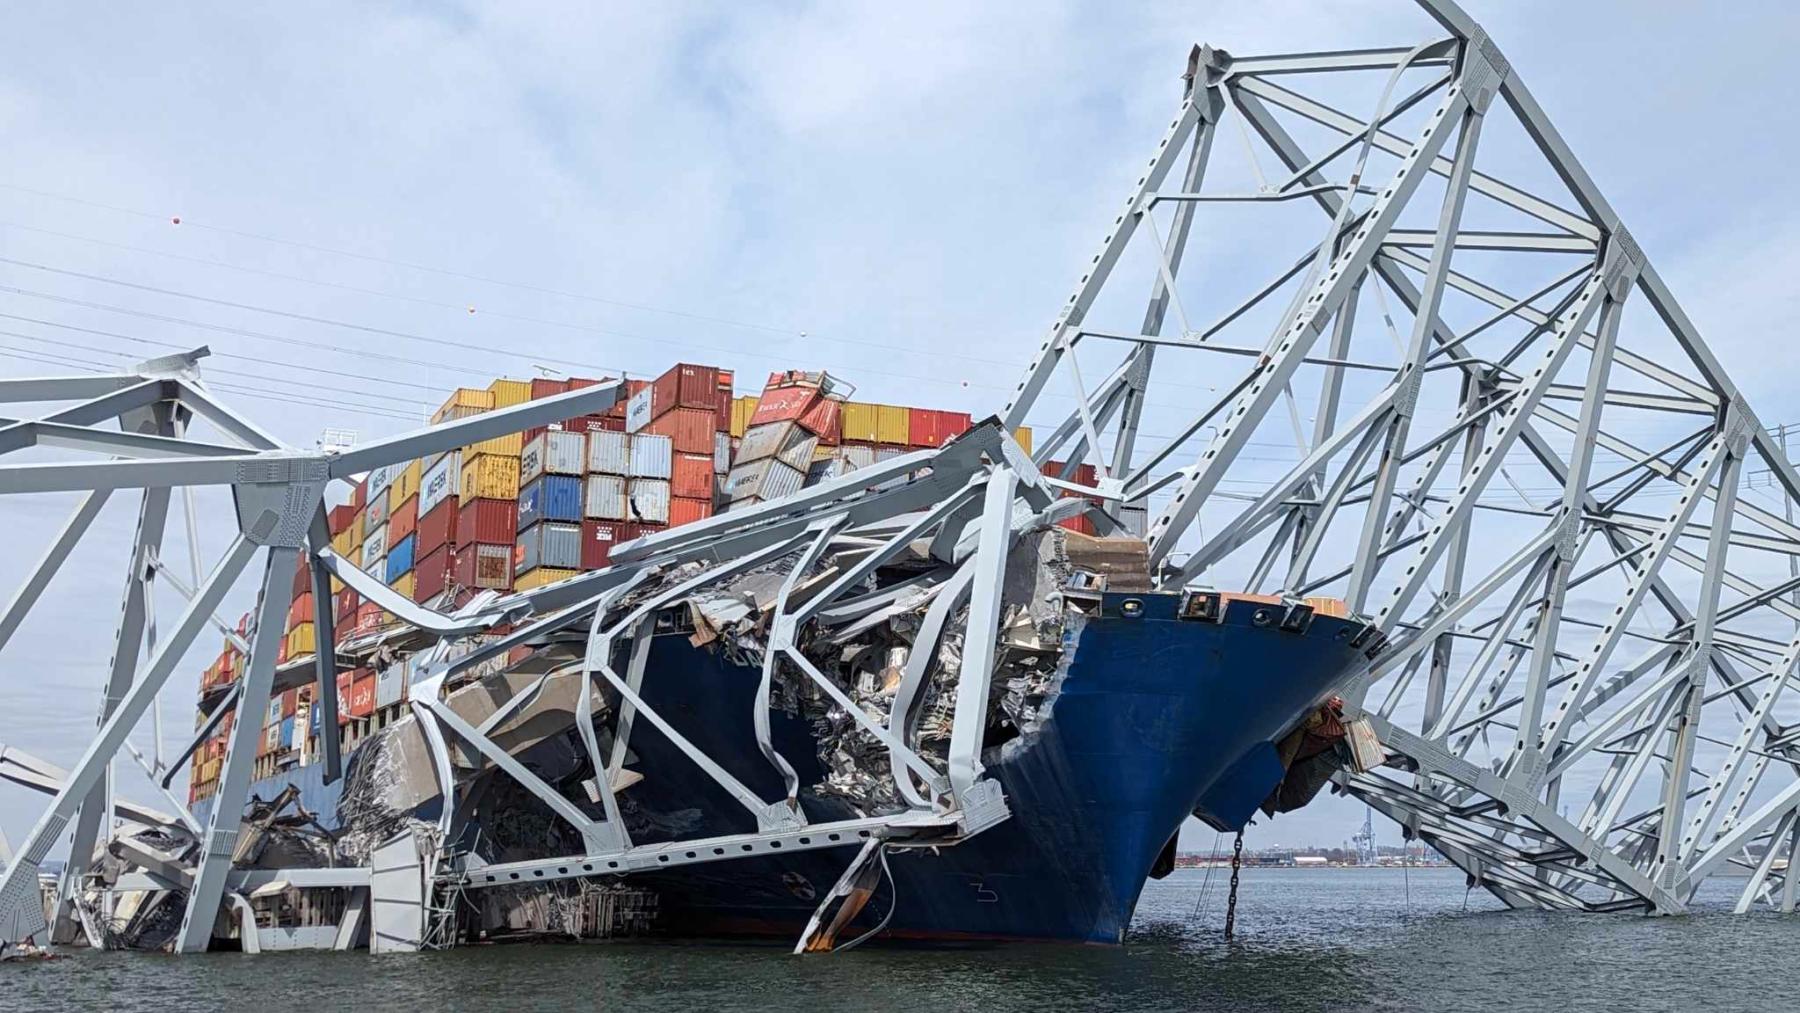 Supply chains could feel ripple effects from Baltimore’s Key Bridge collapse